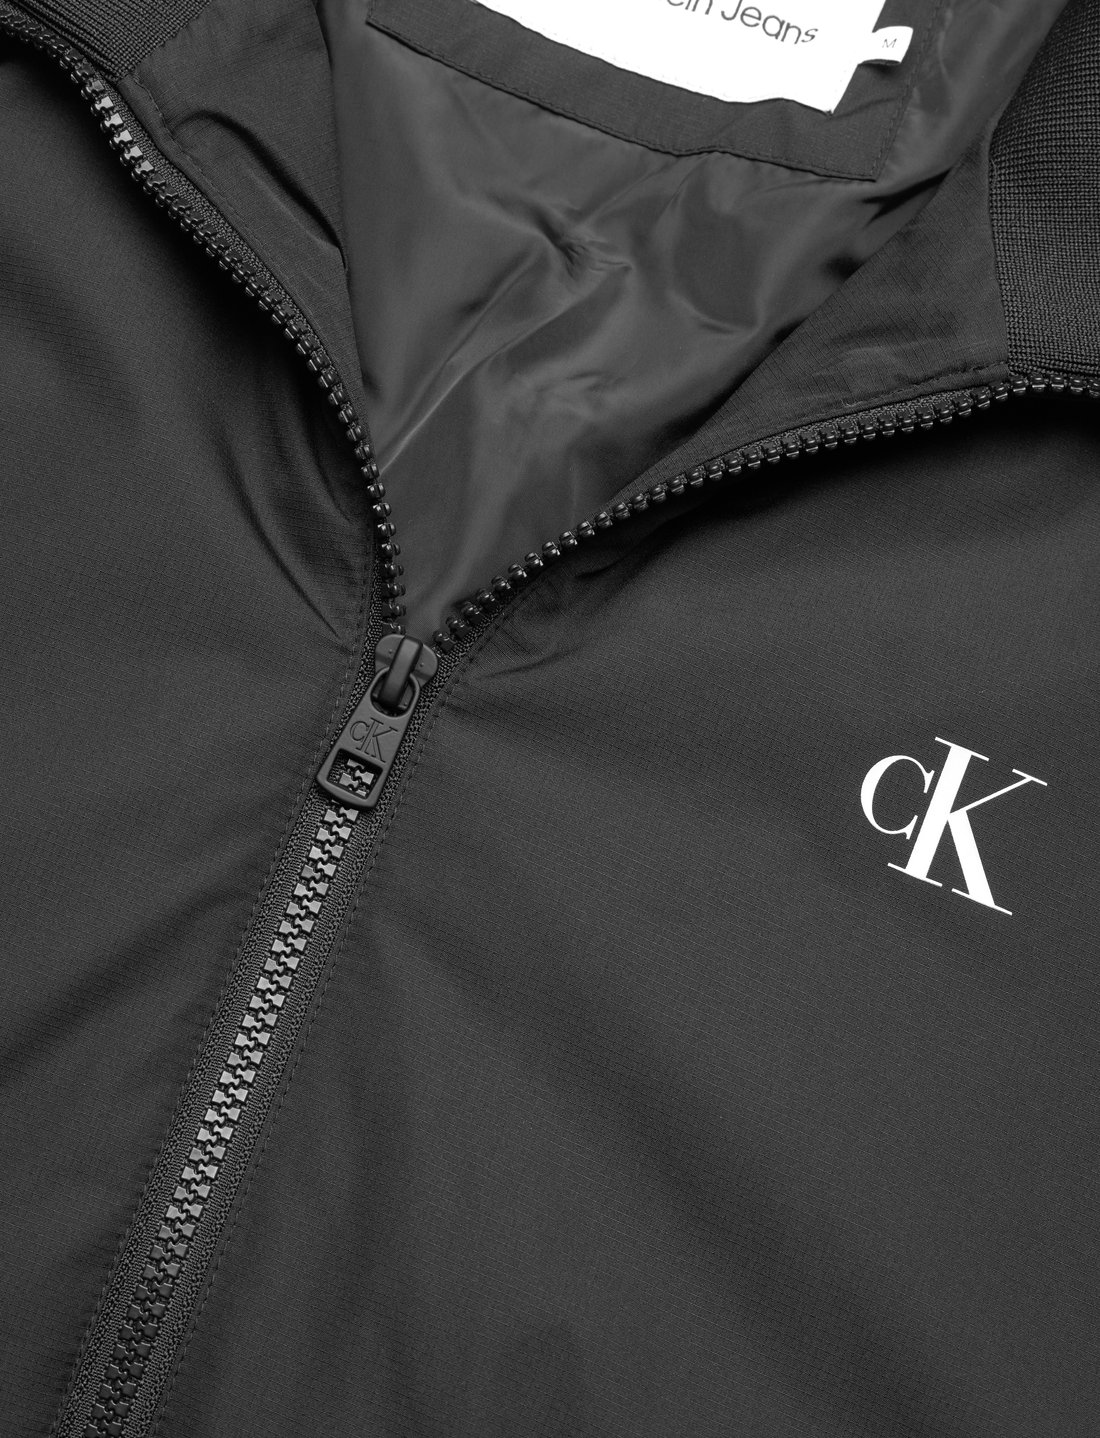 Calvin Klein Jeans Padded Harrington - 74.95 €. Buy Padded jackets from Calvin  Klein Jeans online at Boozt.com. Fast delivery and easy returns